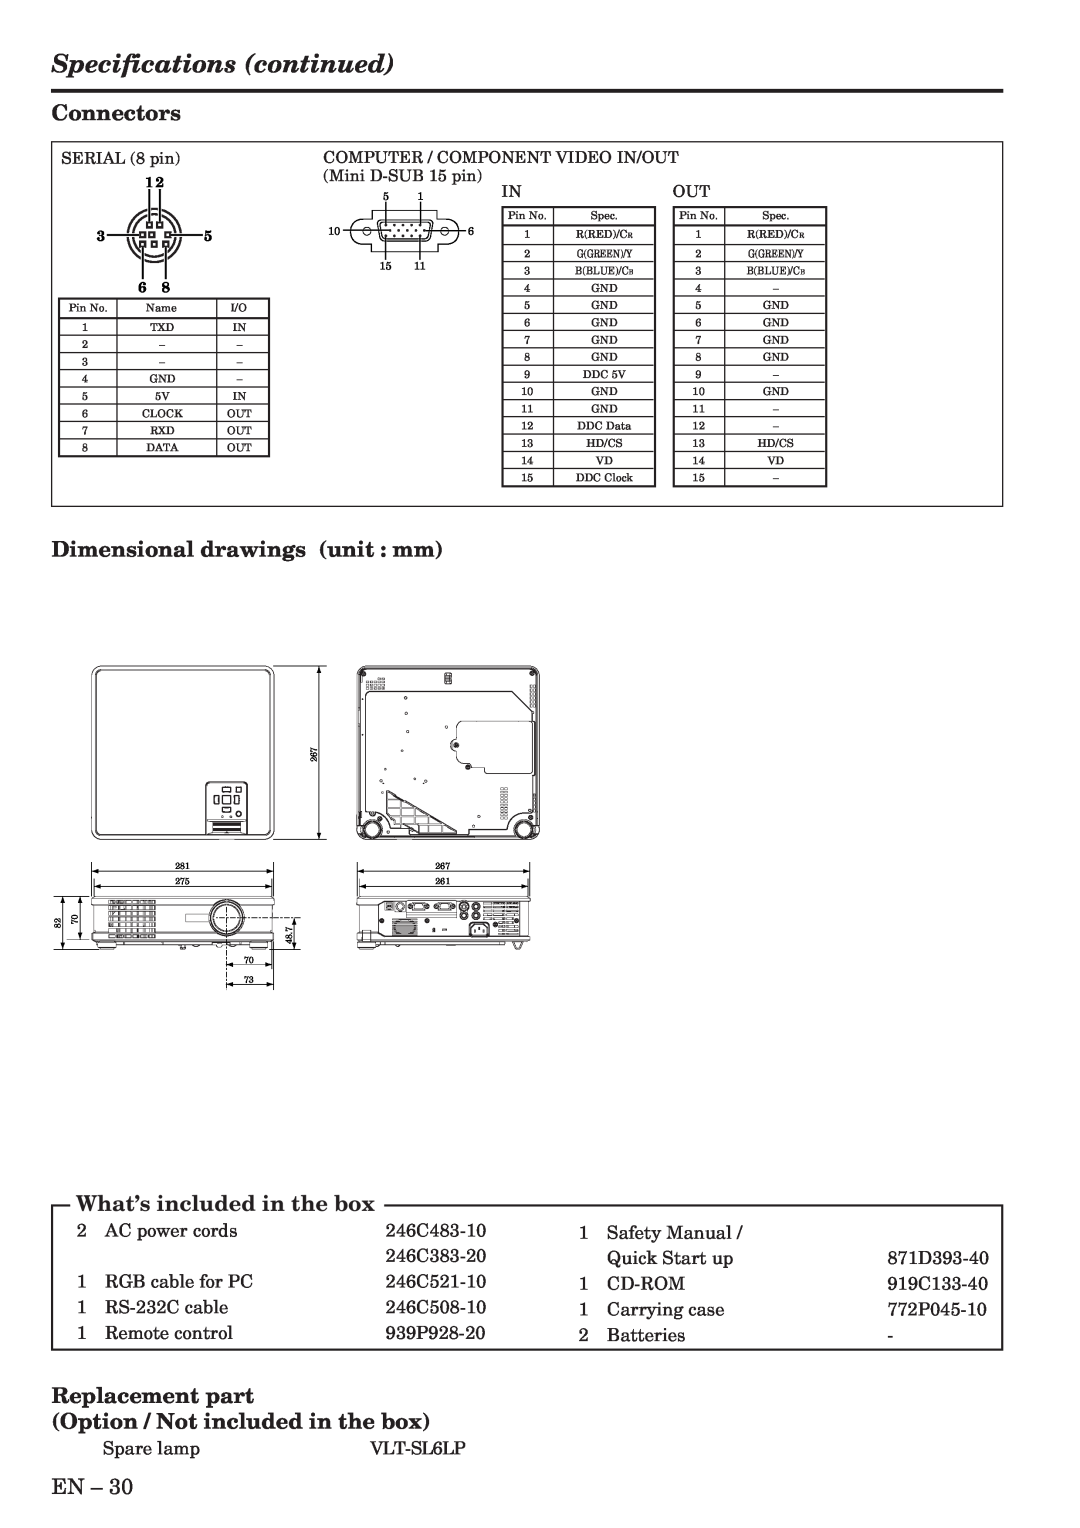 Mitsubishi Electronics XL6U Specifications continued, Connectors, Dimensional drawings unit mm, What’s included in the box 